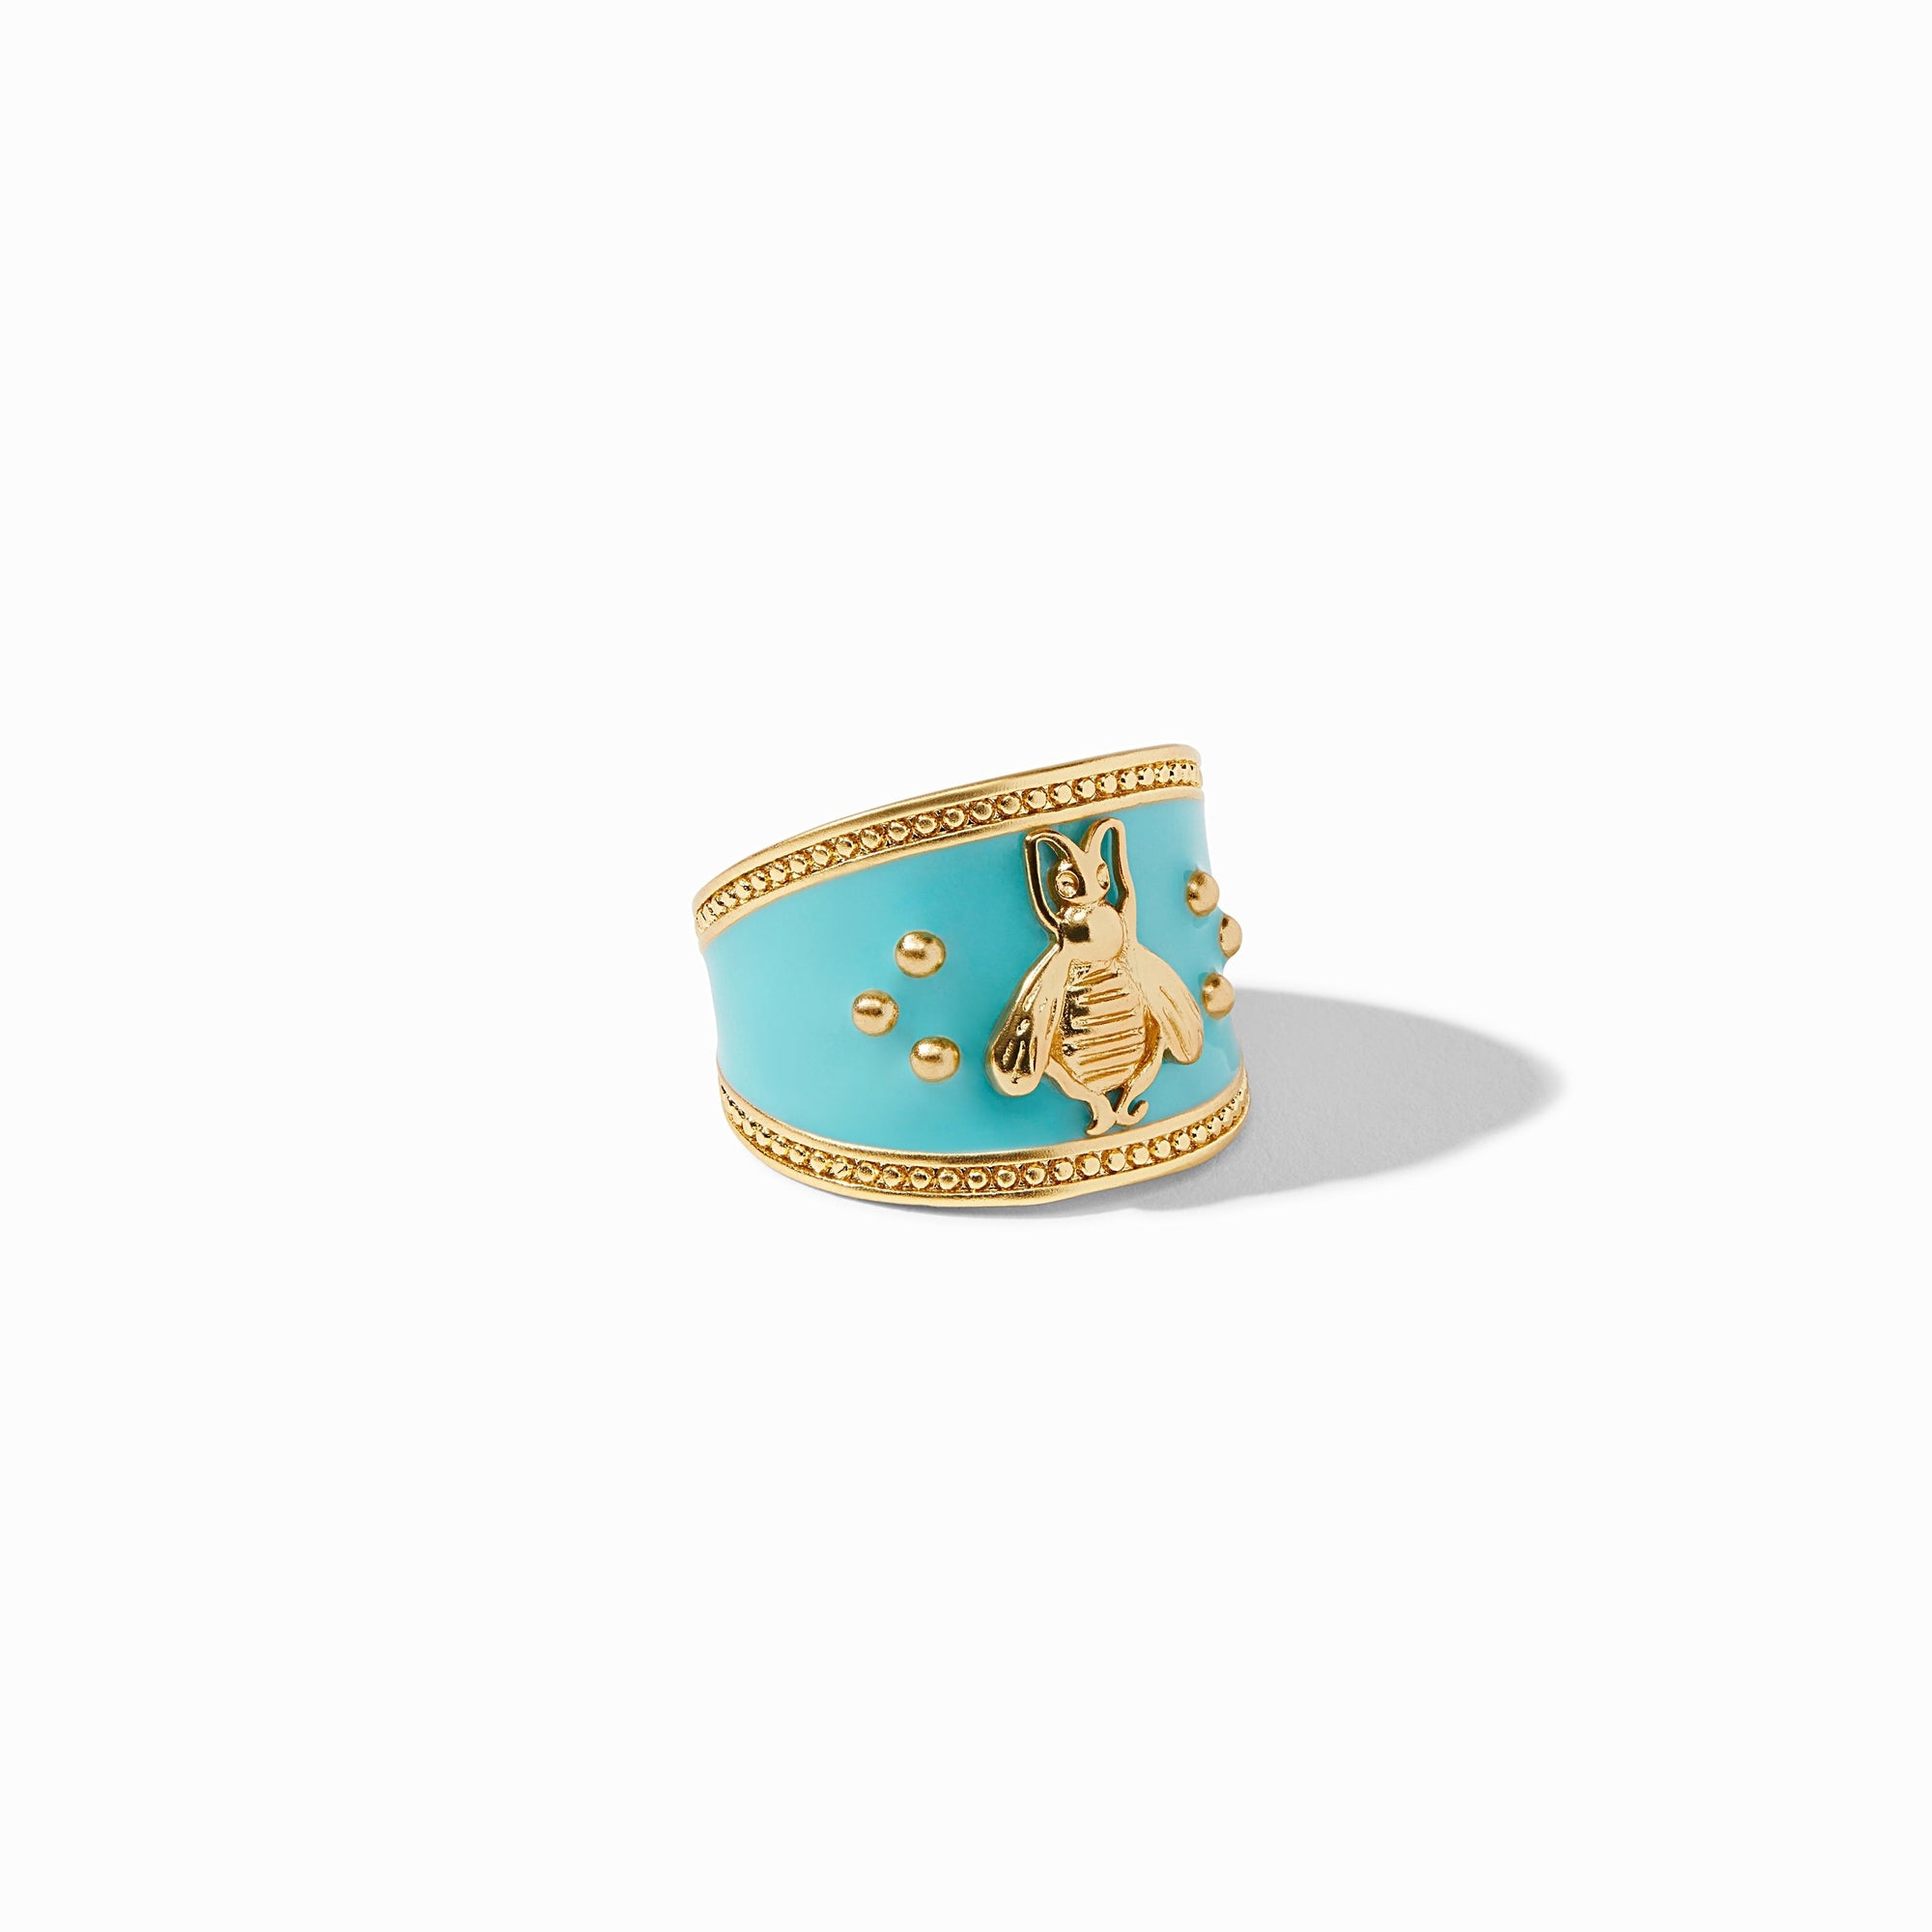 Crest Ring in Bahamian Blue Enamel, Bahamian Blue Enamel, bamboo collection, rings, joy of gifting, bee, best seller